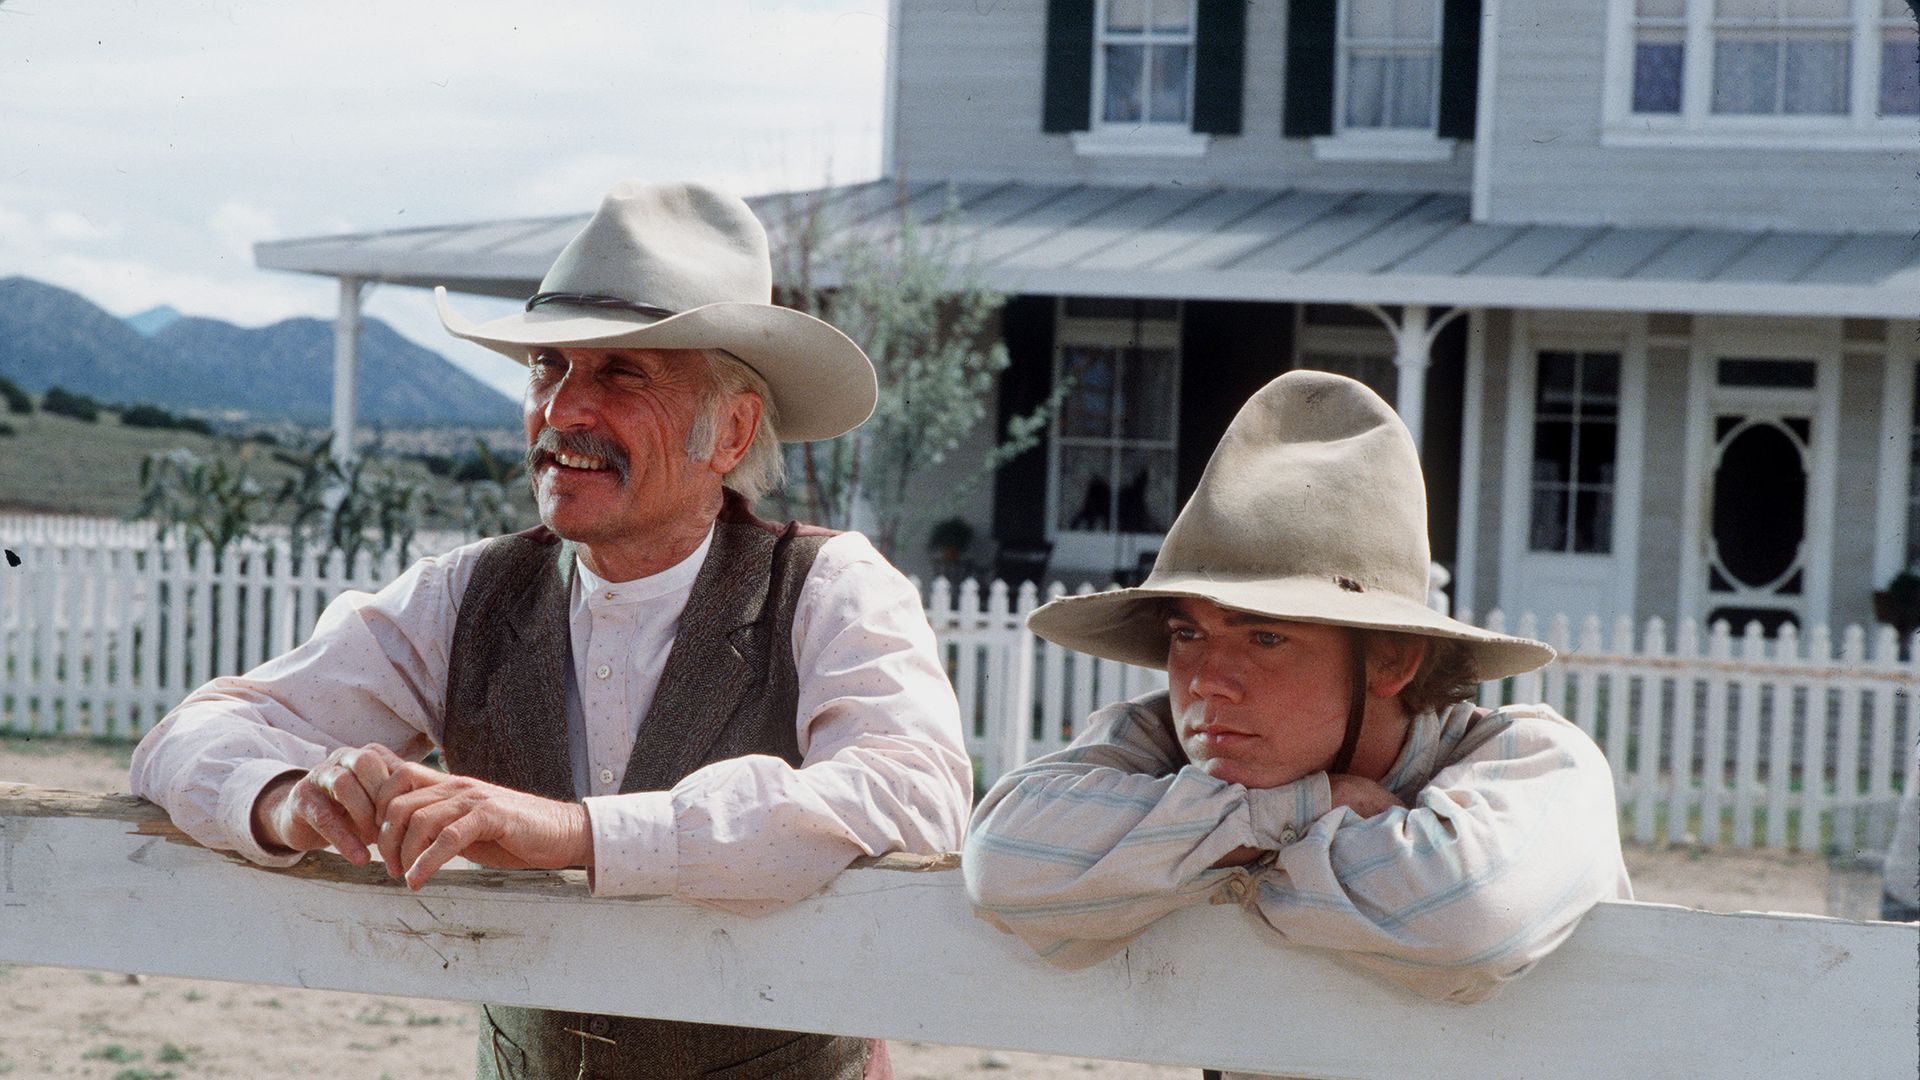 American actors Robert Duvall (as Augustus 'Gus' McCrae) and Rick Schroder (as Newt Dobbs) lean on a fence in a scene from the television miniseries 'Lonesome Dove,' 